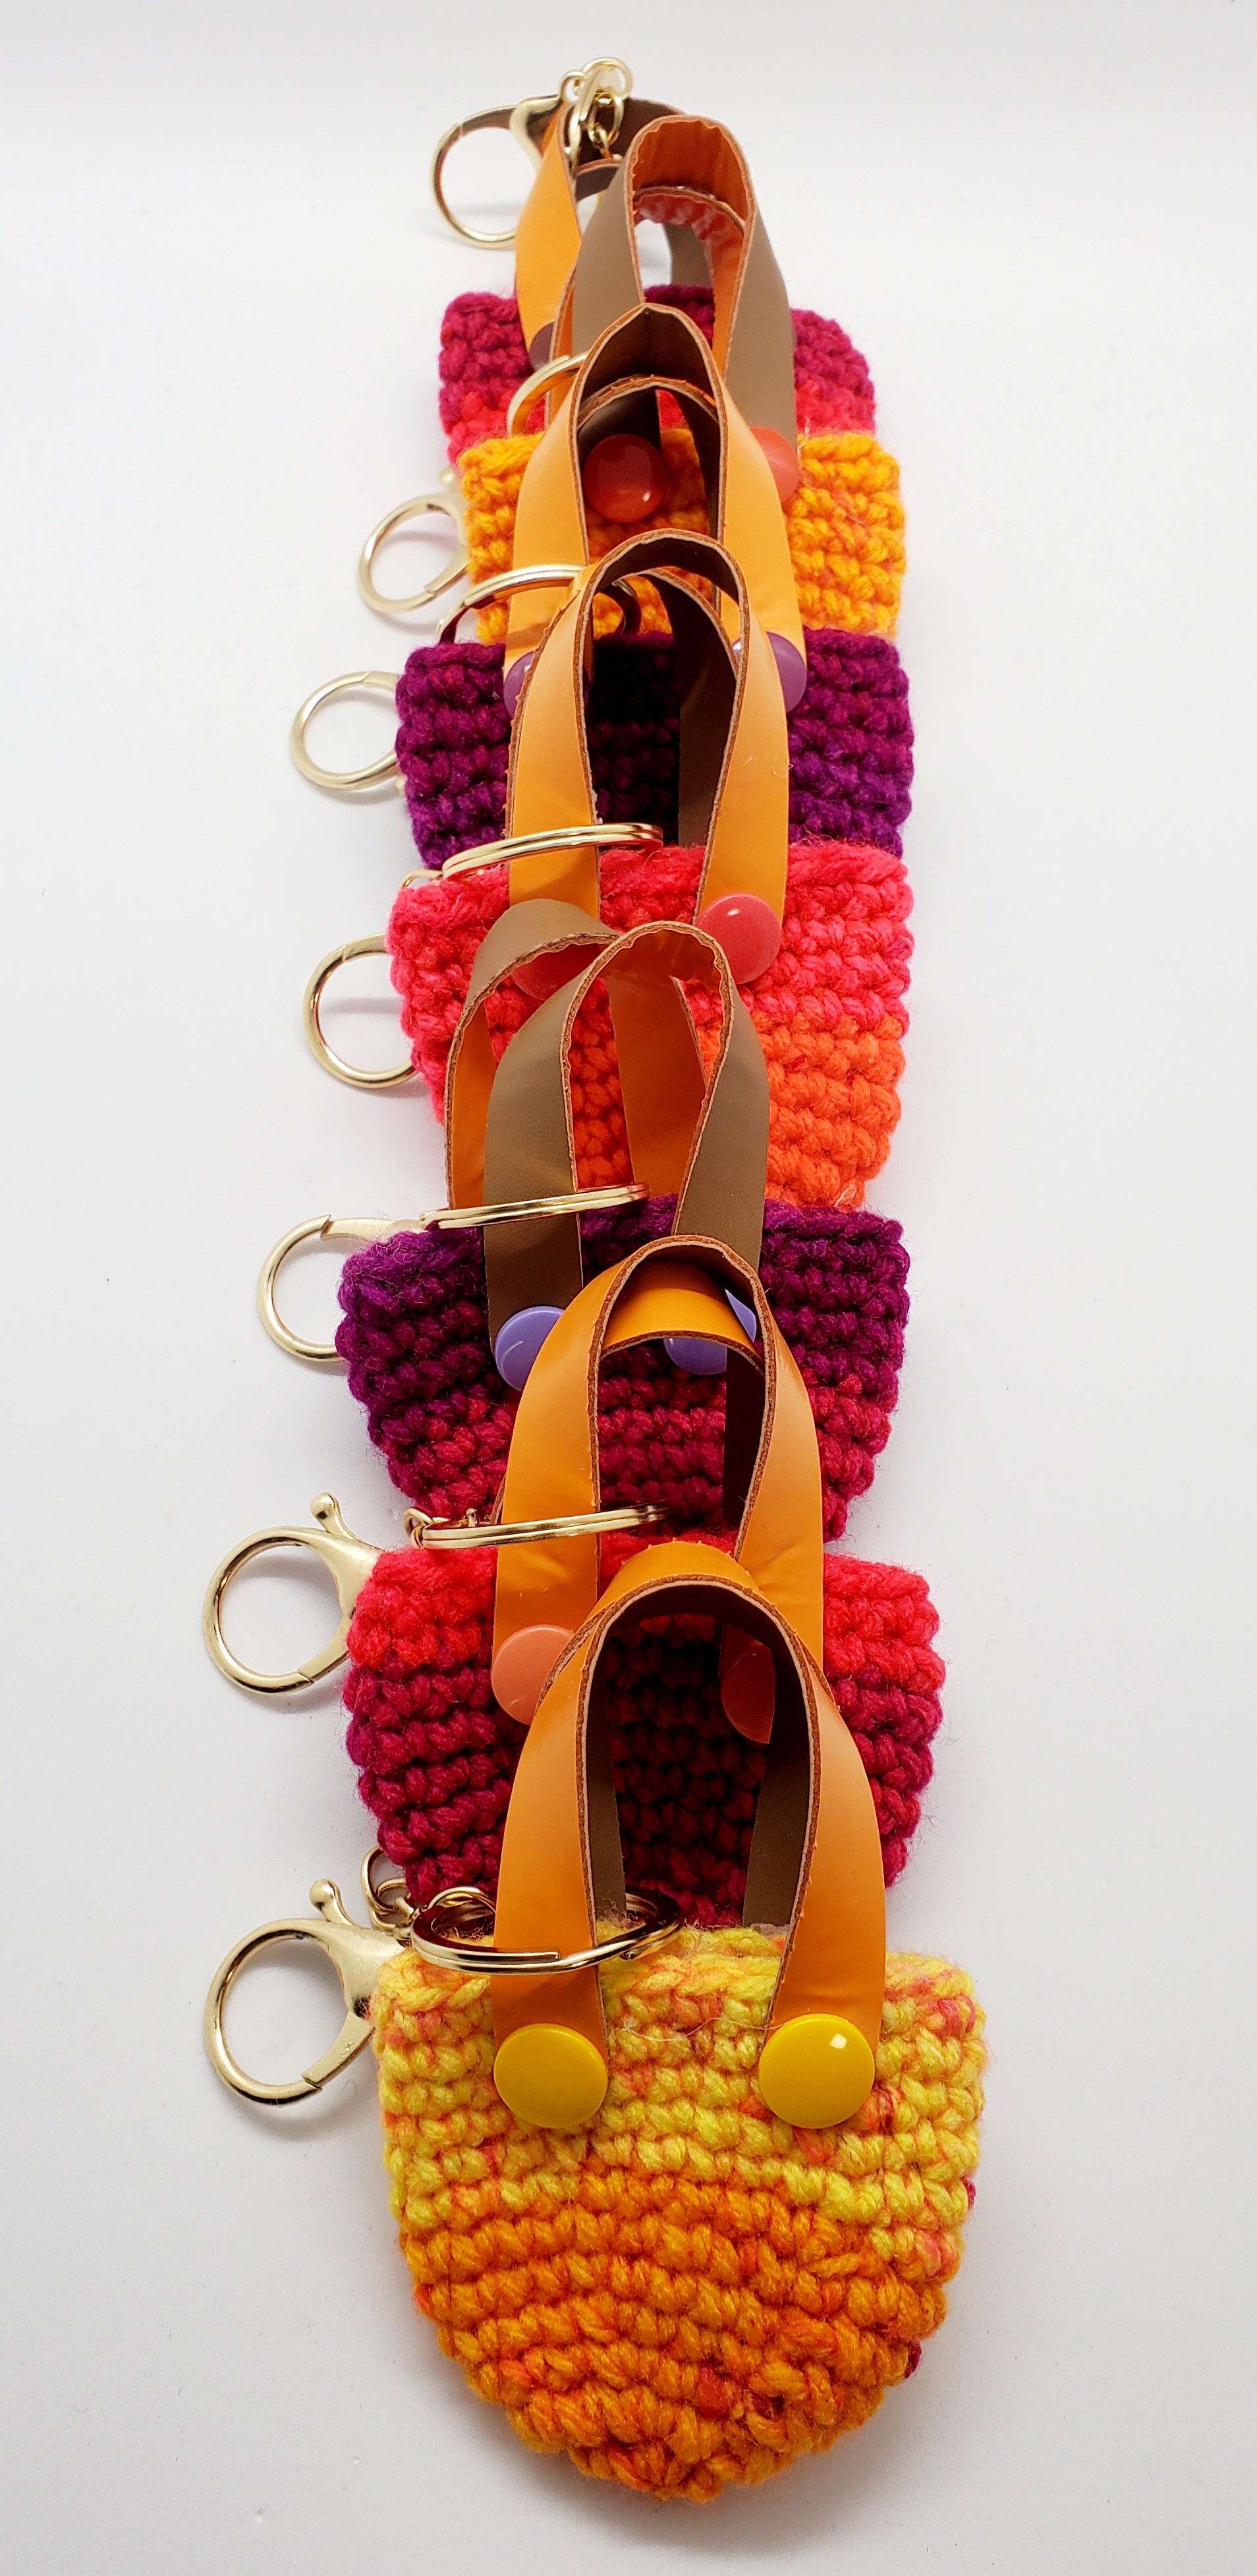 group (line) view of Crochet mini tote keychain with vinyl handles